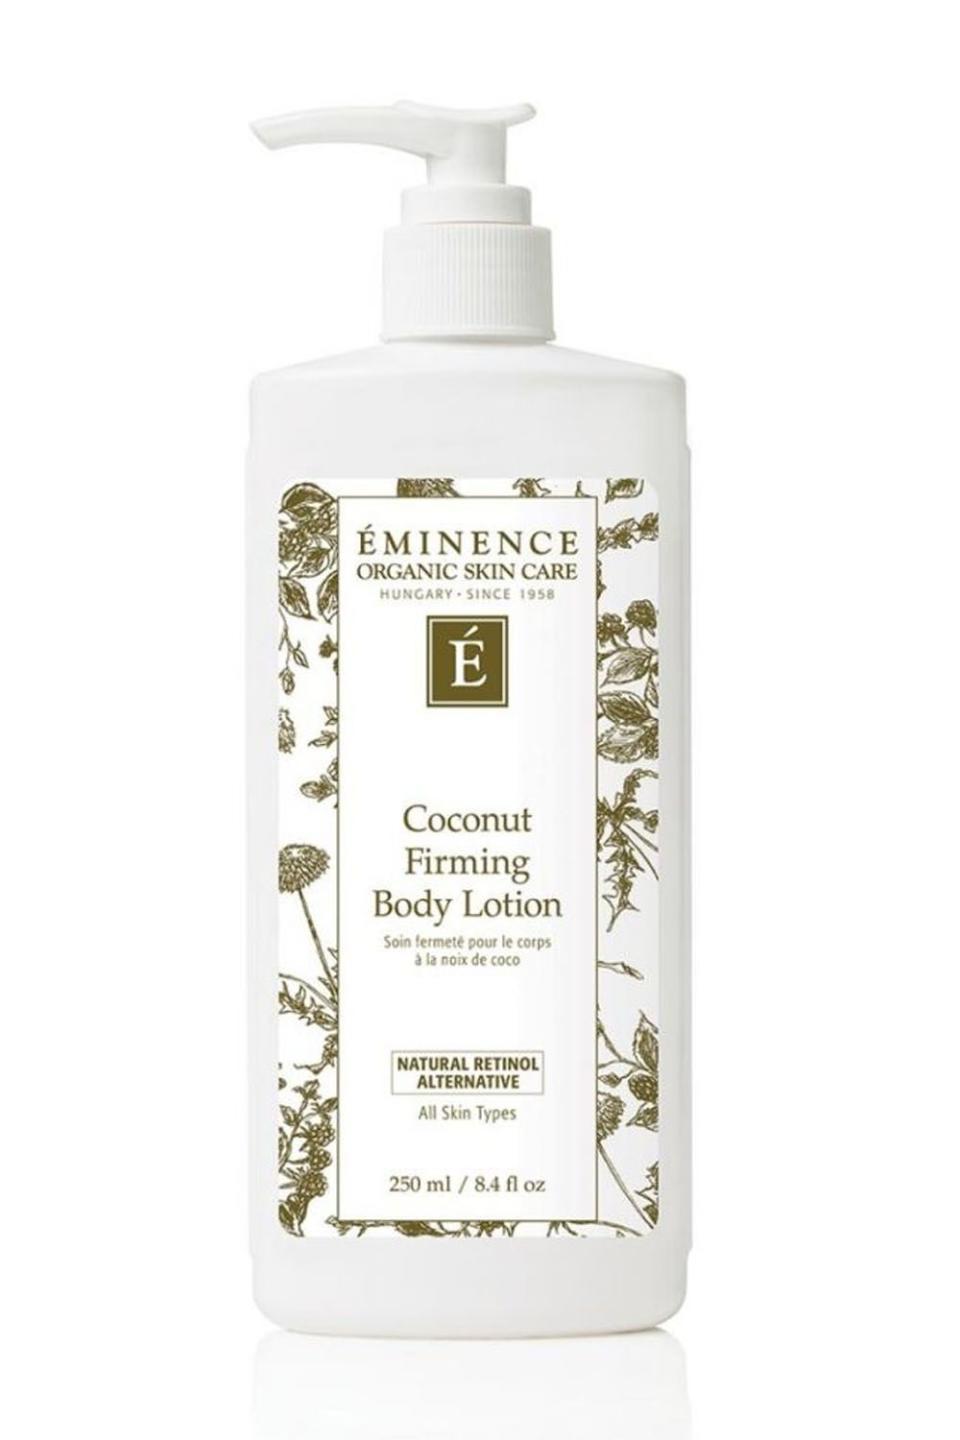 10) Eminence Organic Skin Care Coconut Firming Body Lotion